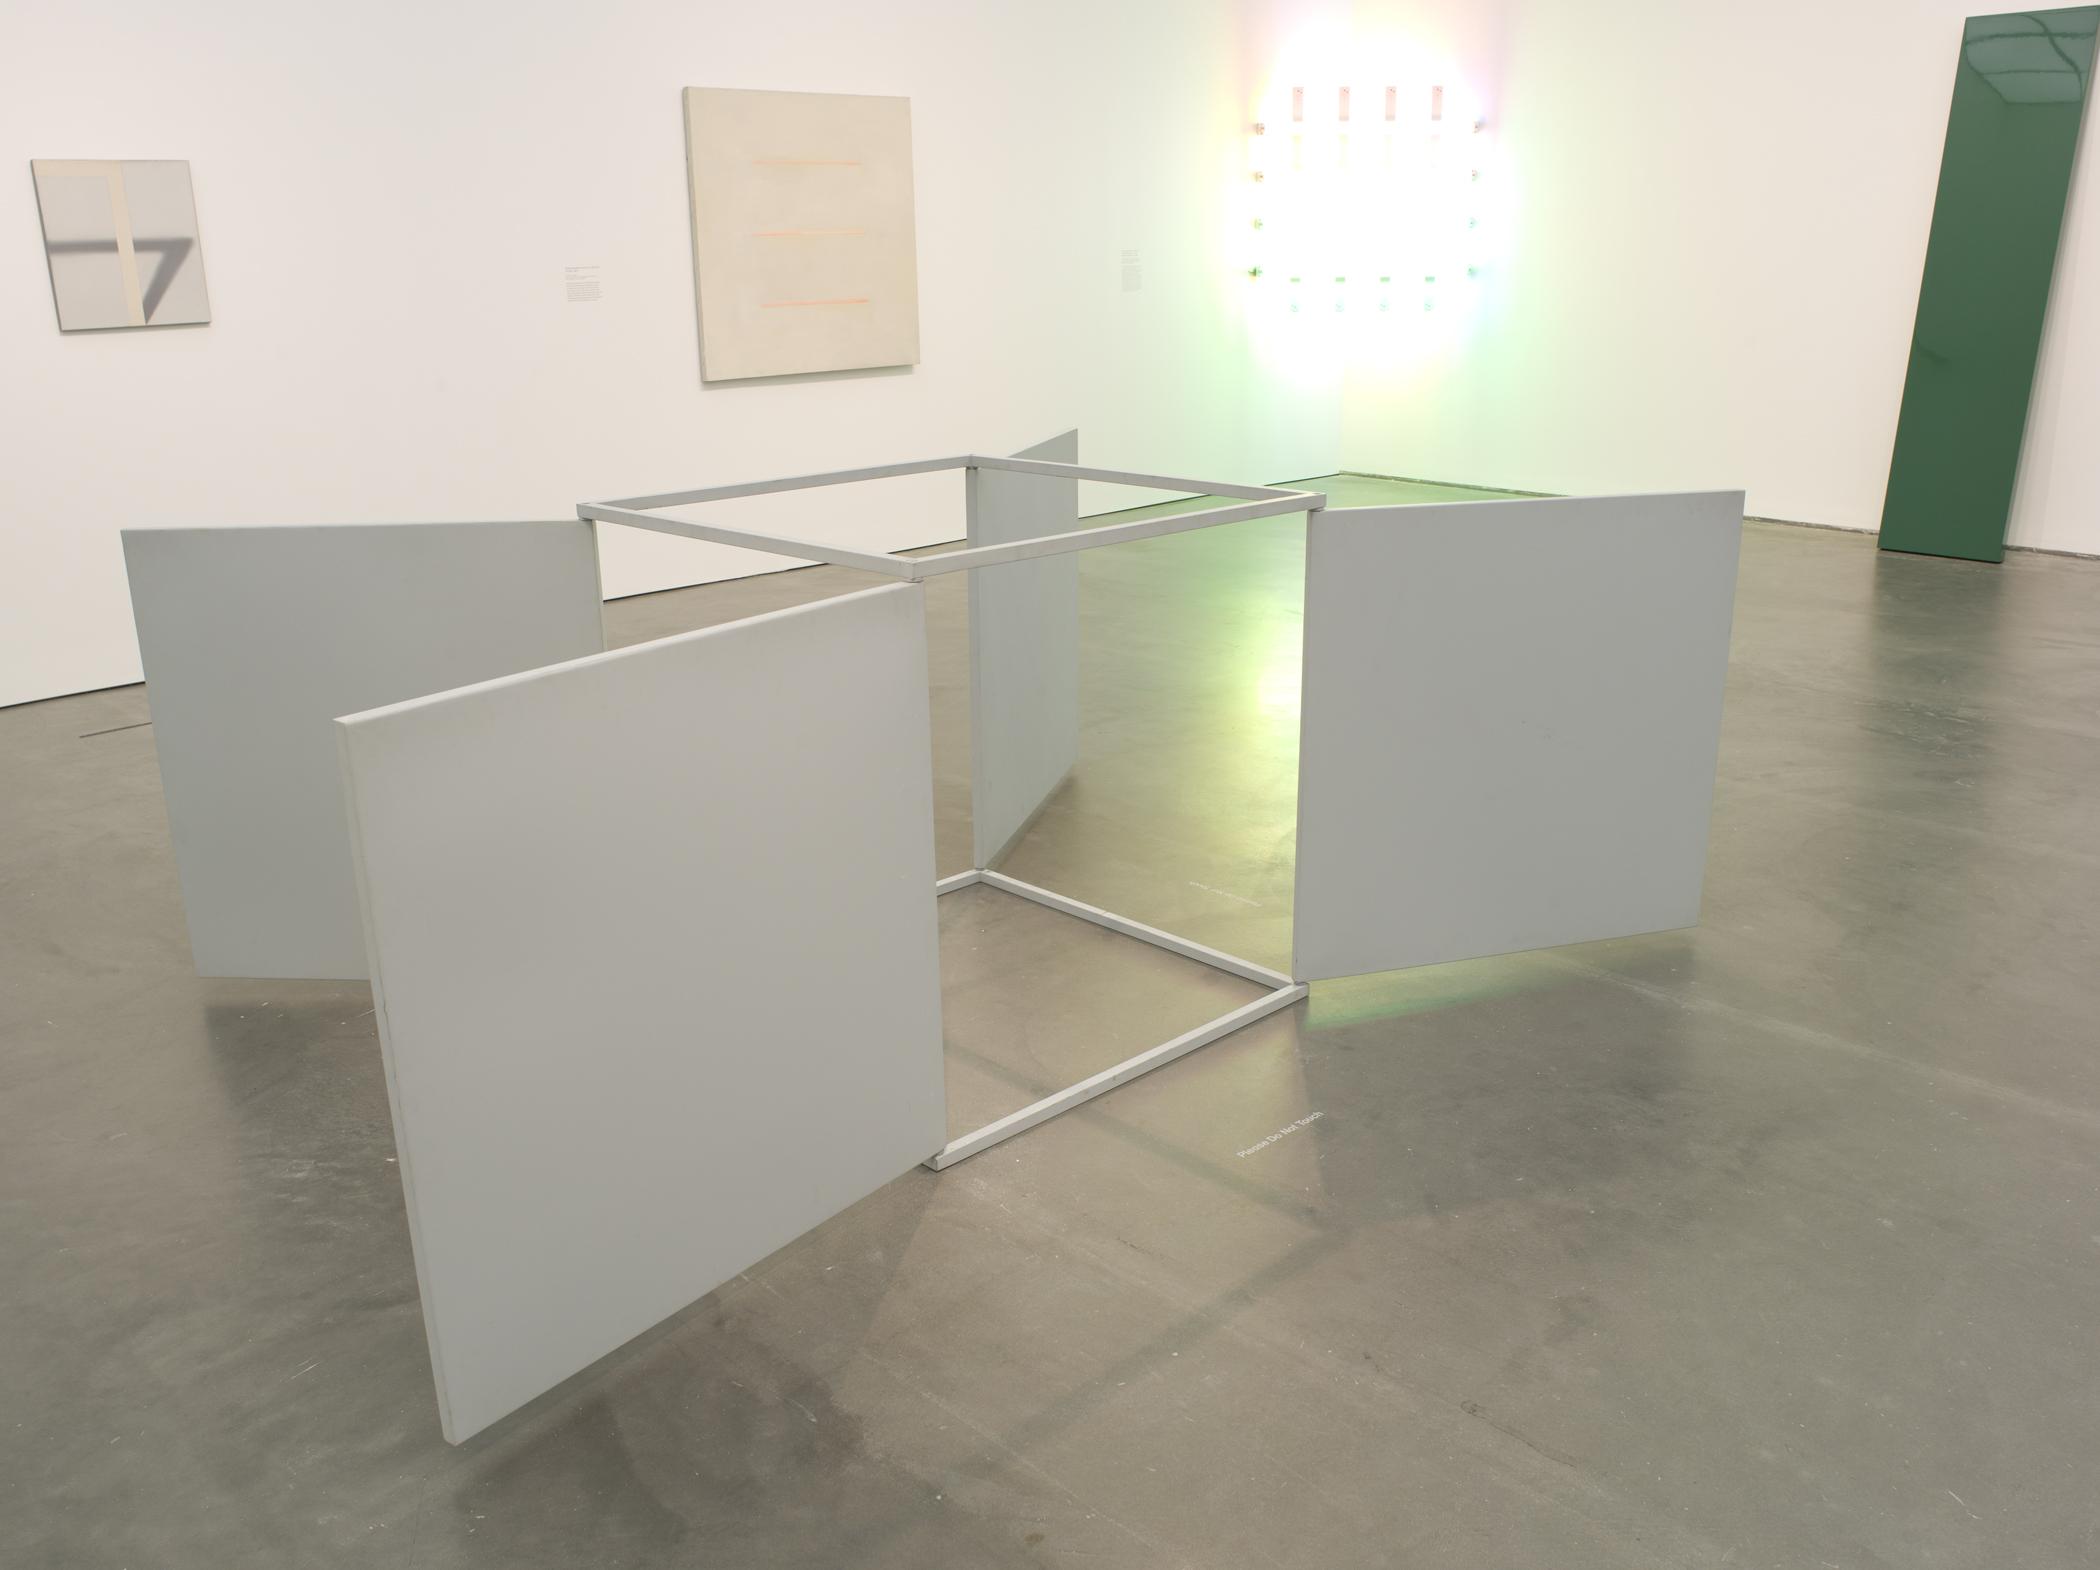 Gallery view of minimalist sculptures and paintings